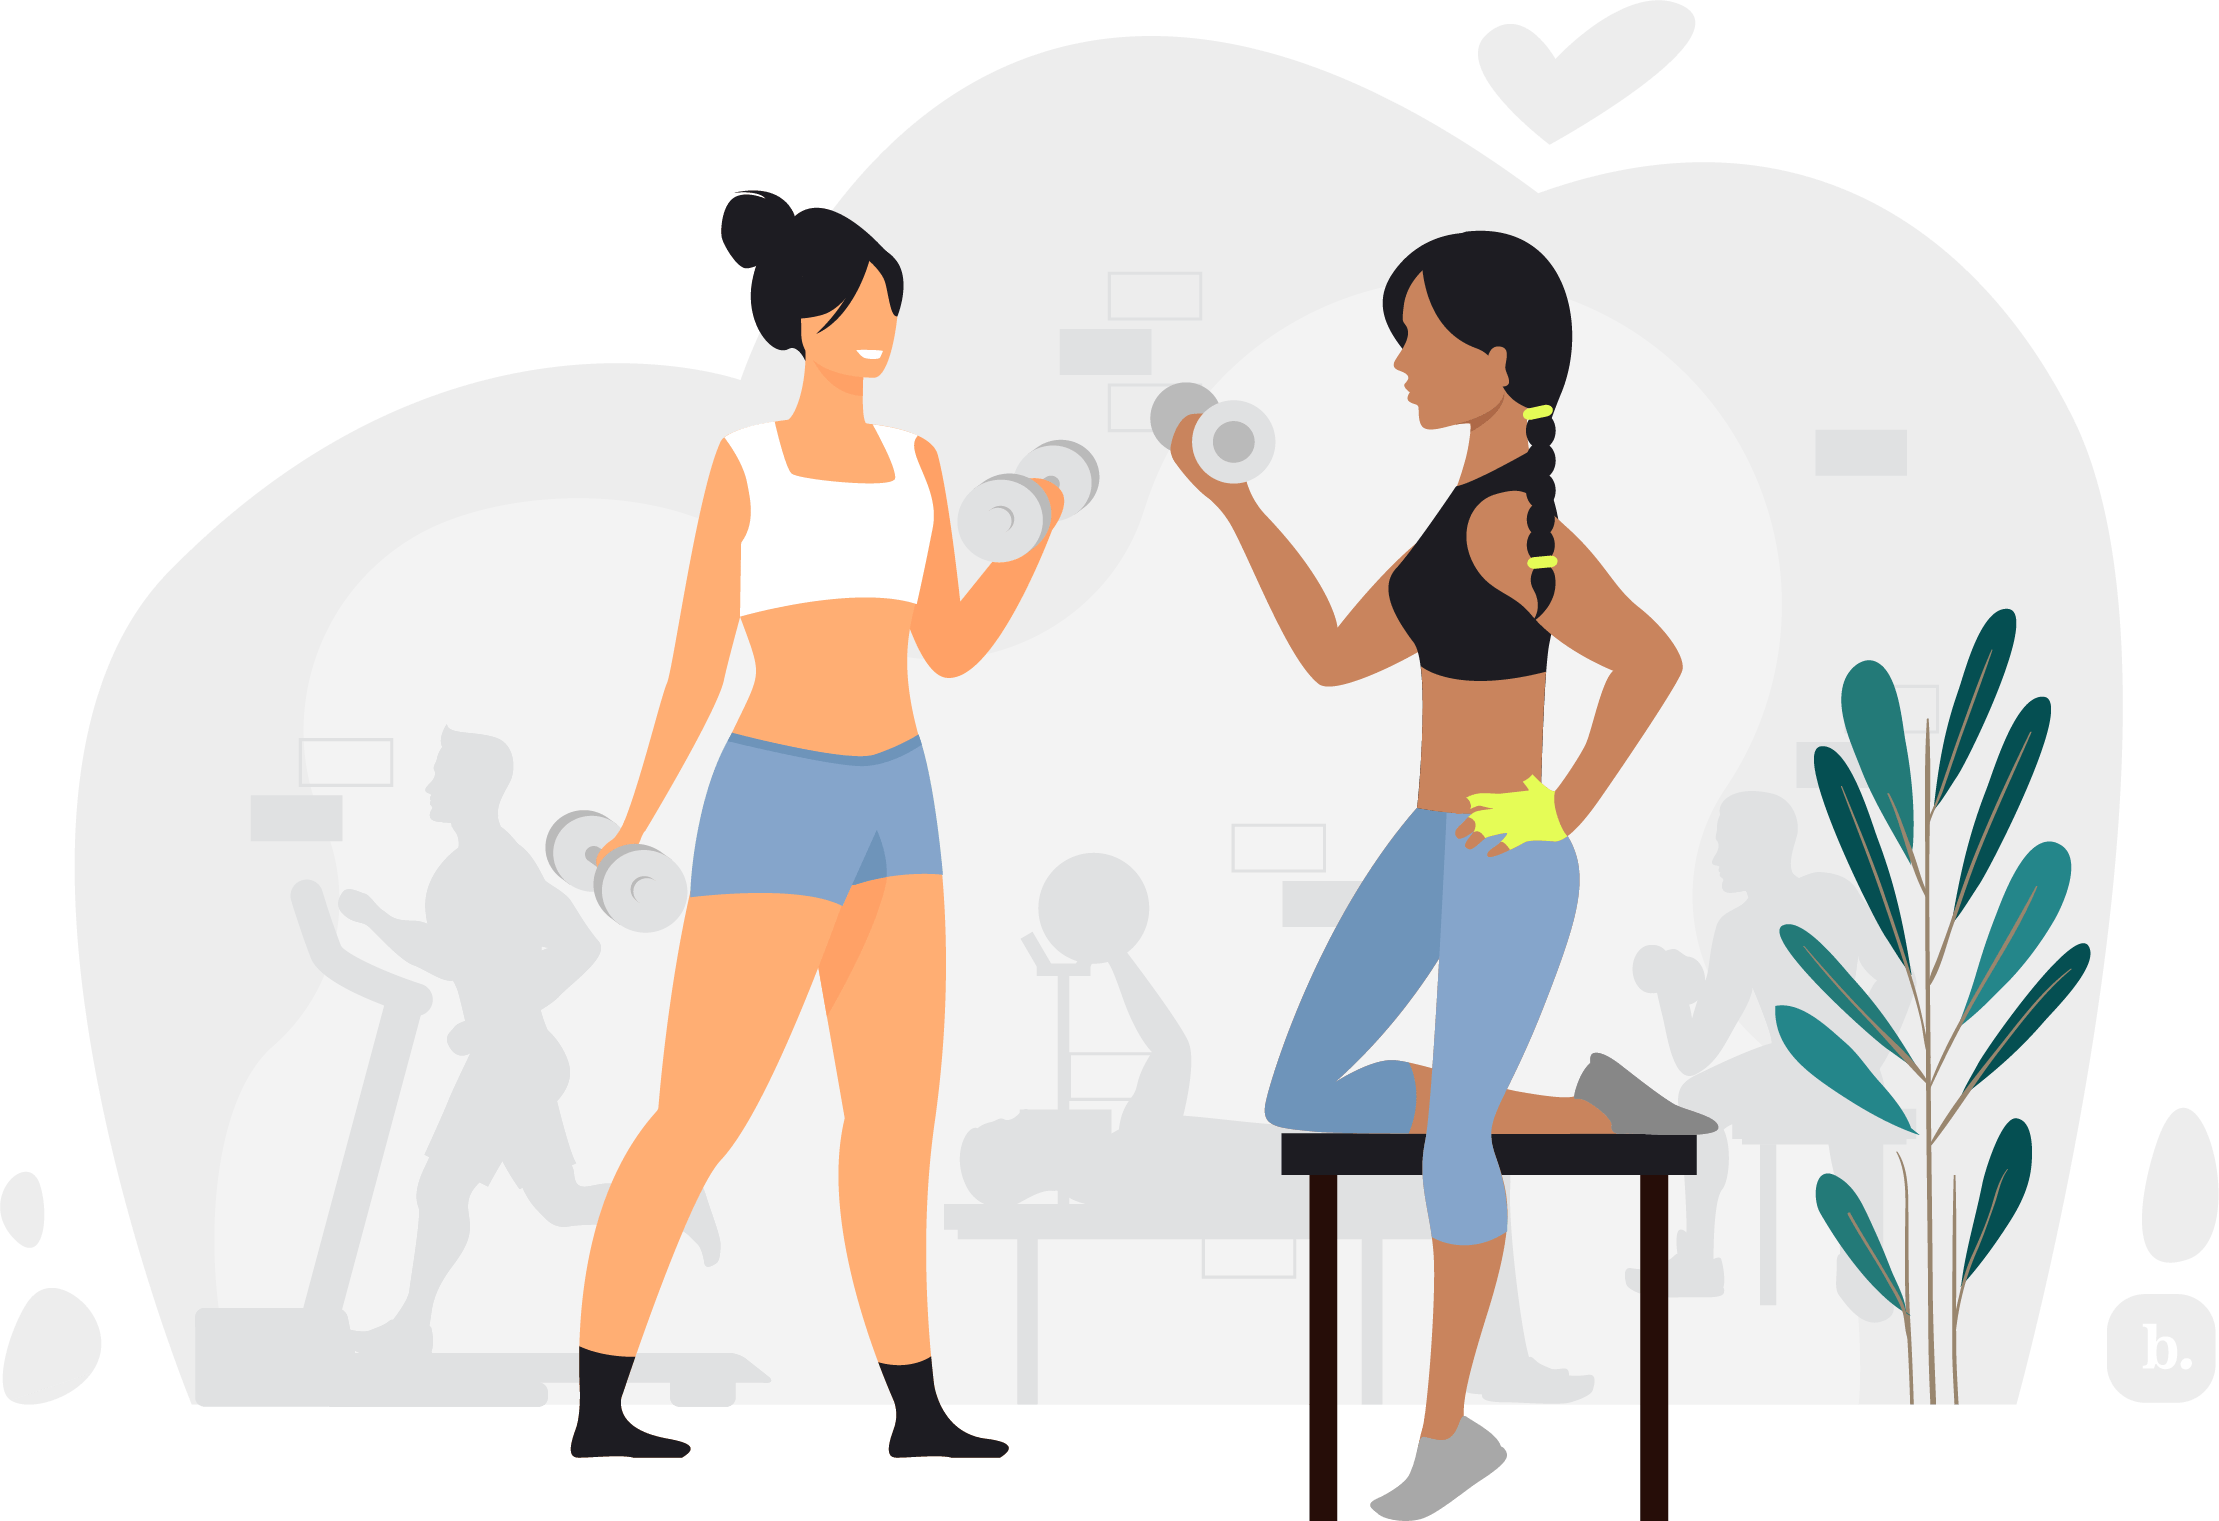 graphic of two people talking to each other and lifting weights